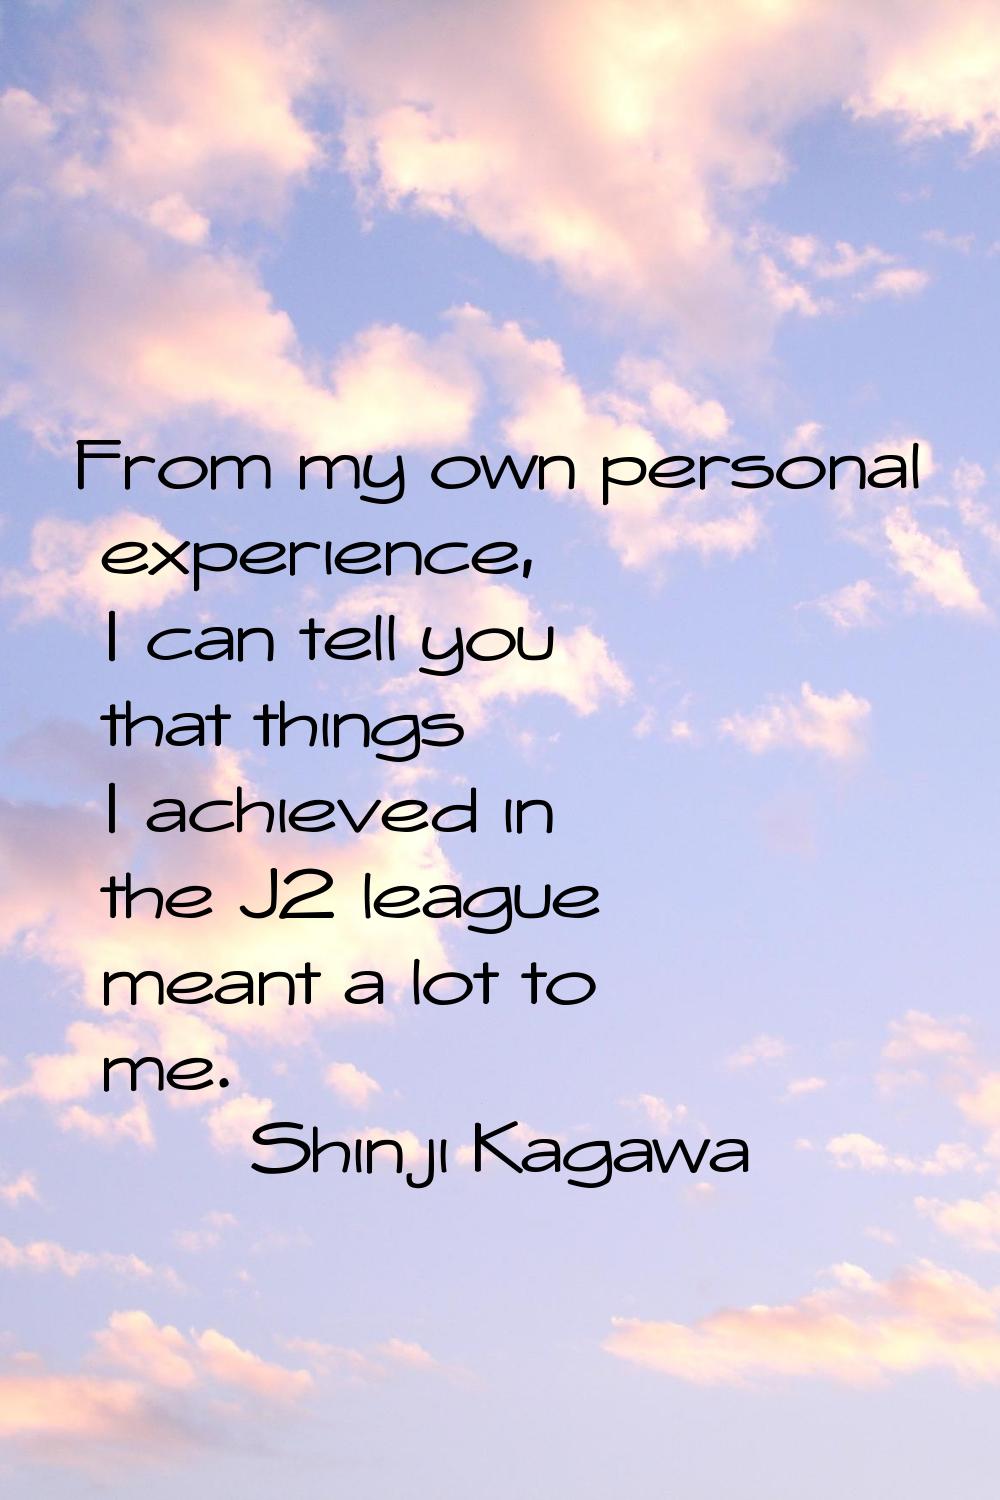 From my own personal experience, I can tell you that things I achieved in the J2 league meant a lot